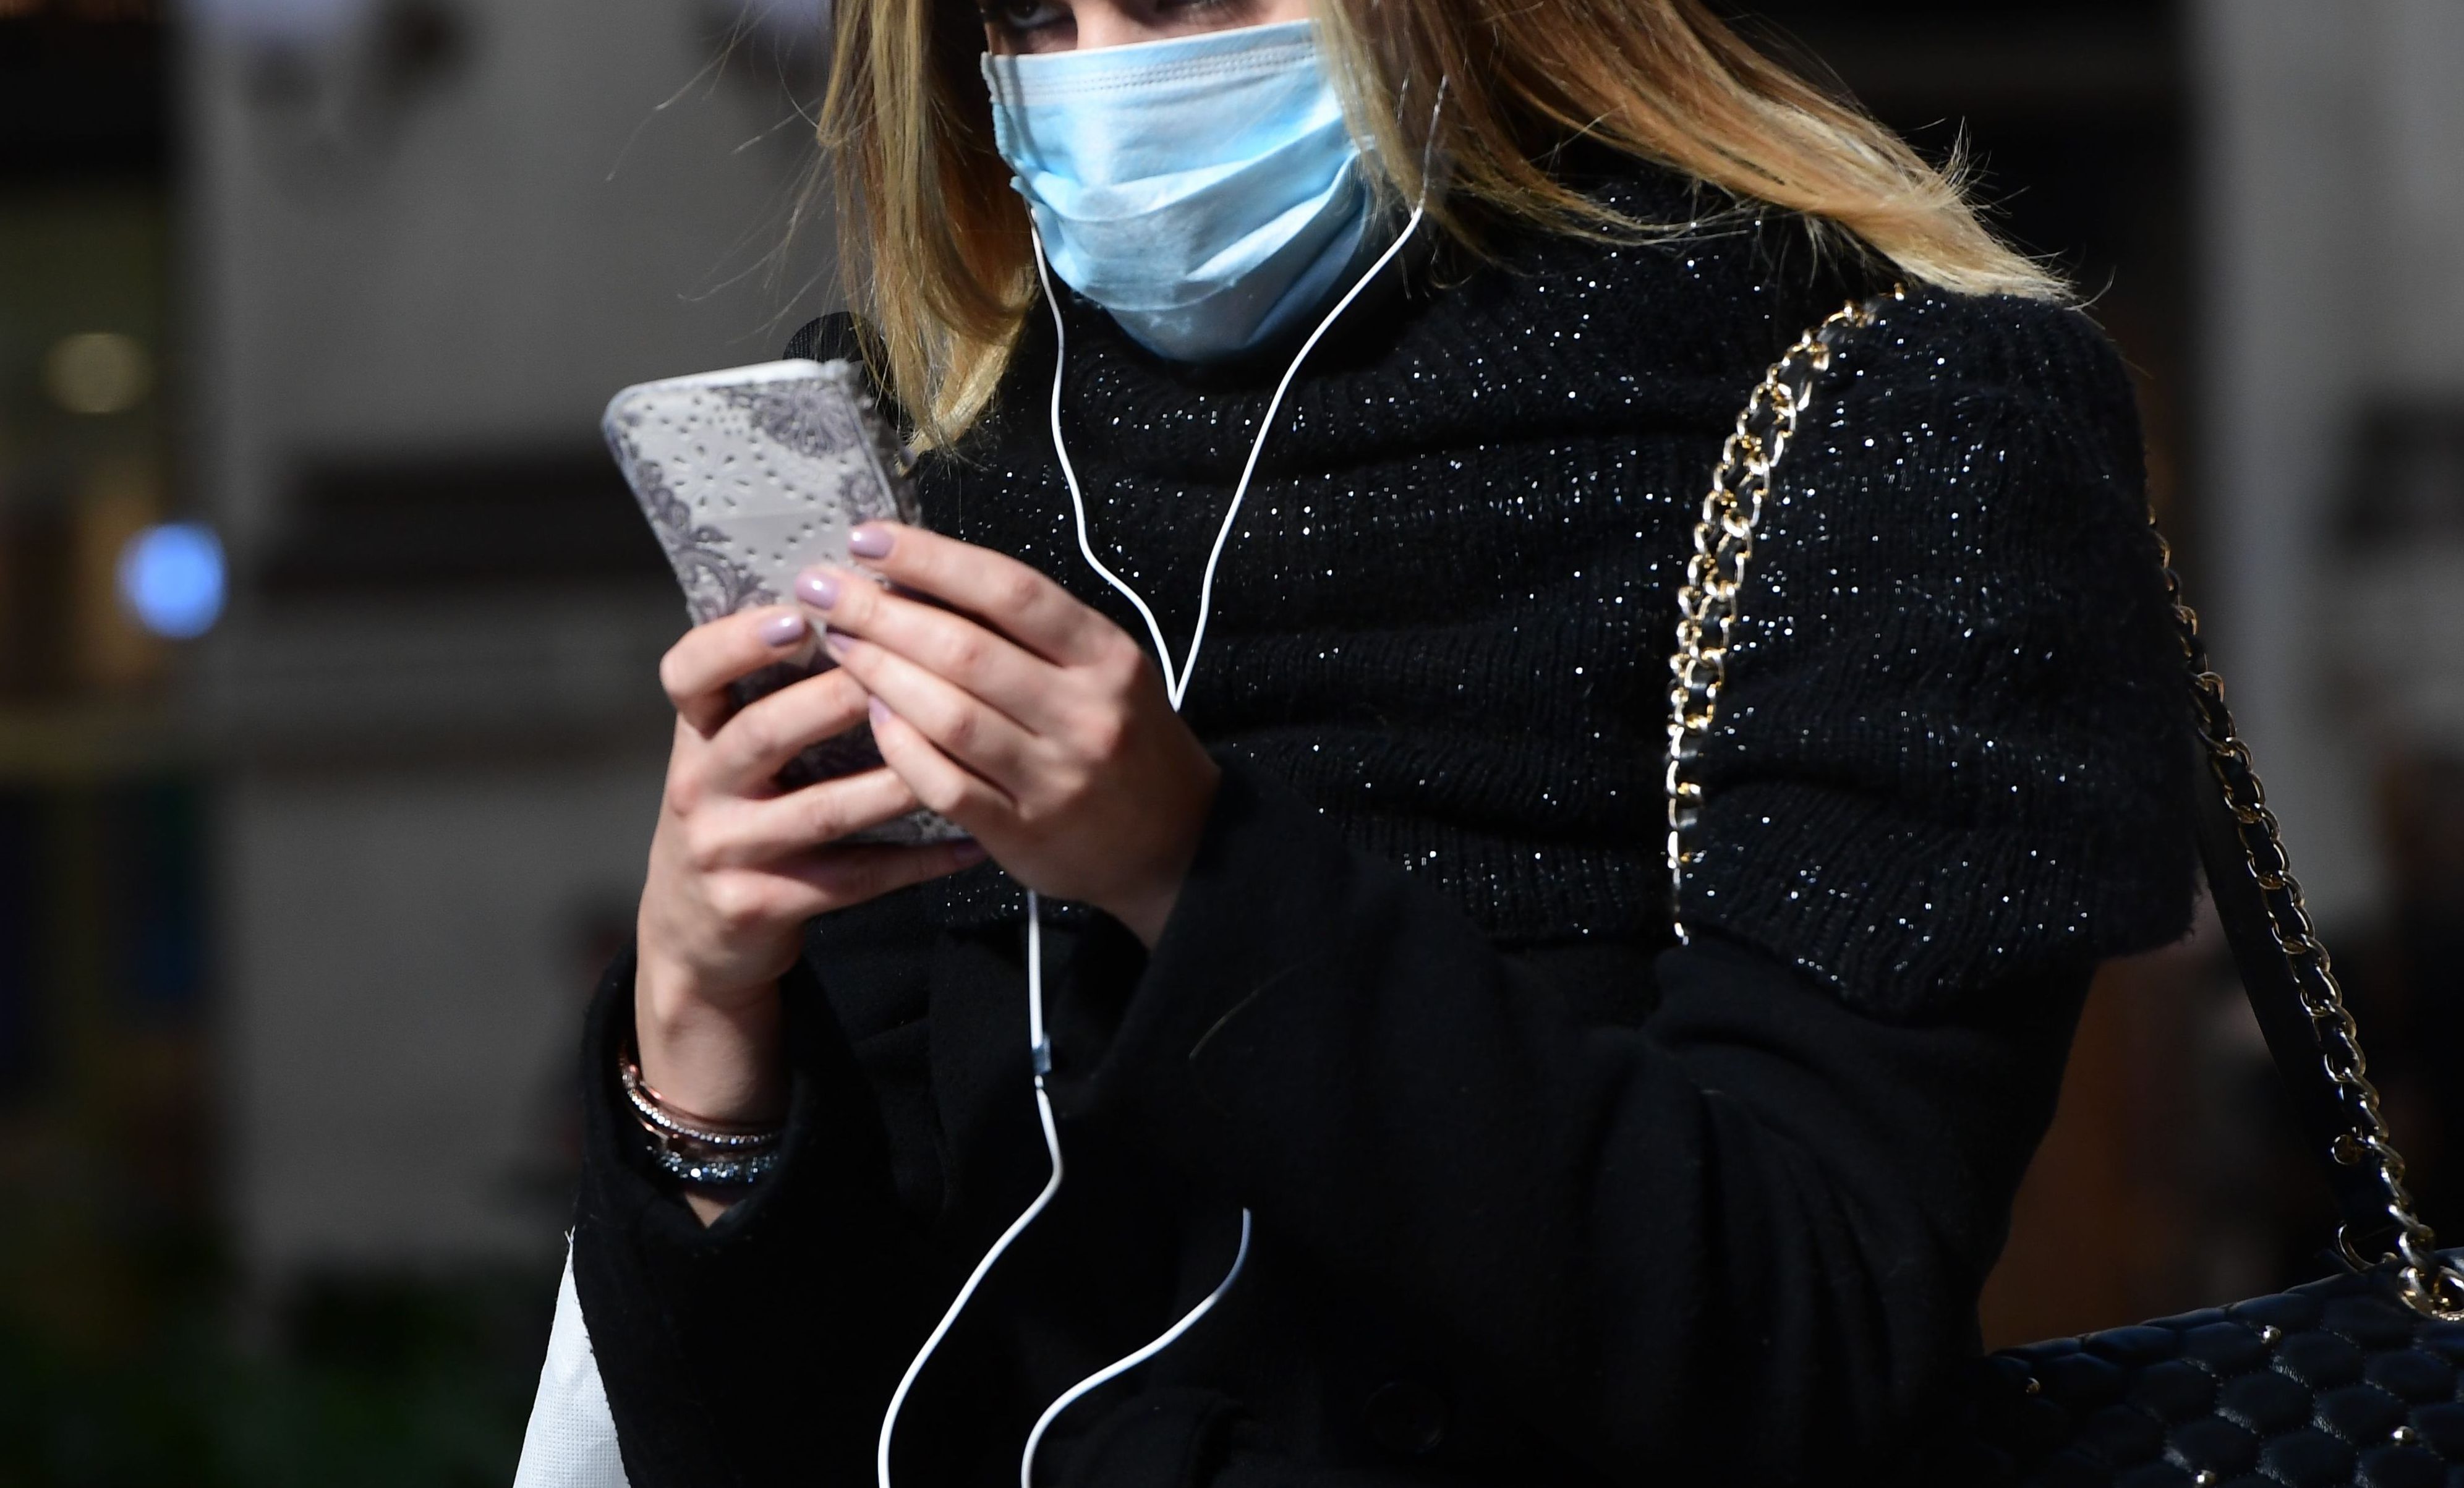 A woman wearing a protective mask on Feb. 28, 2020. (Miguel Medina—AFP/Getty Images)